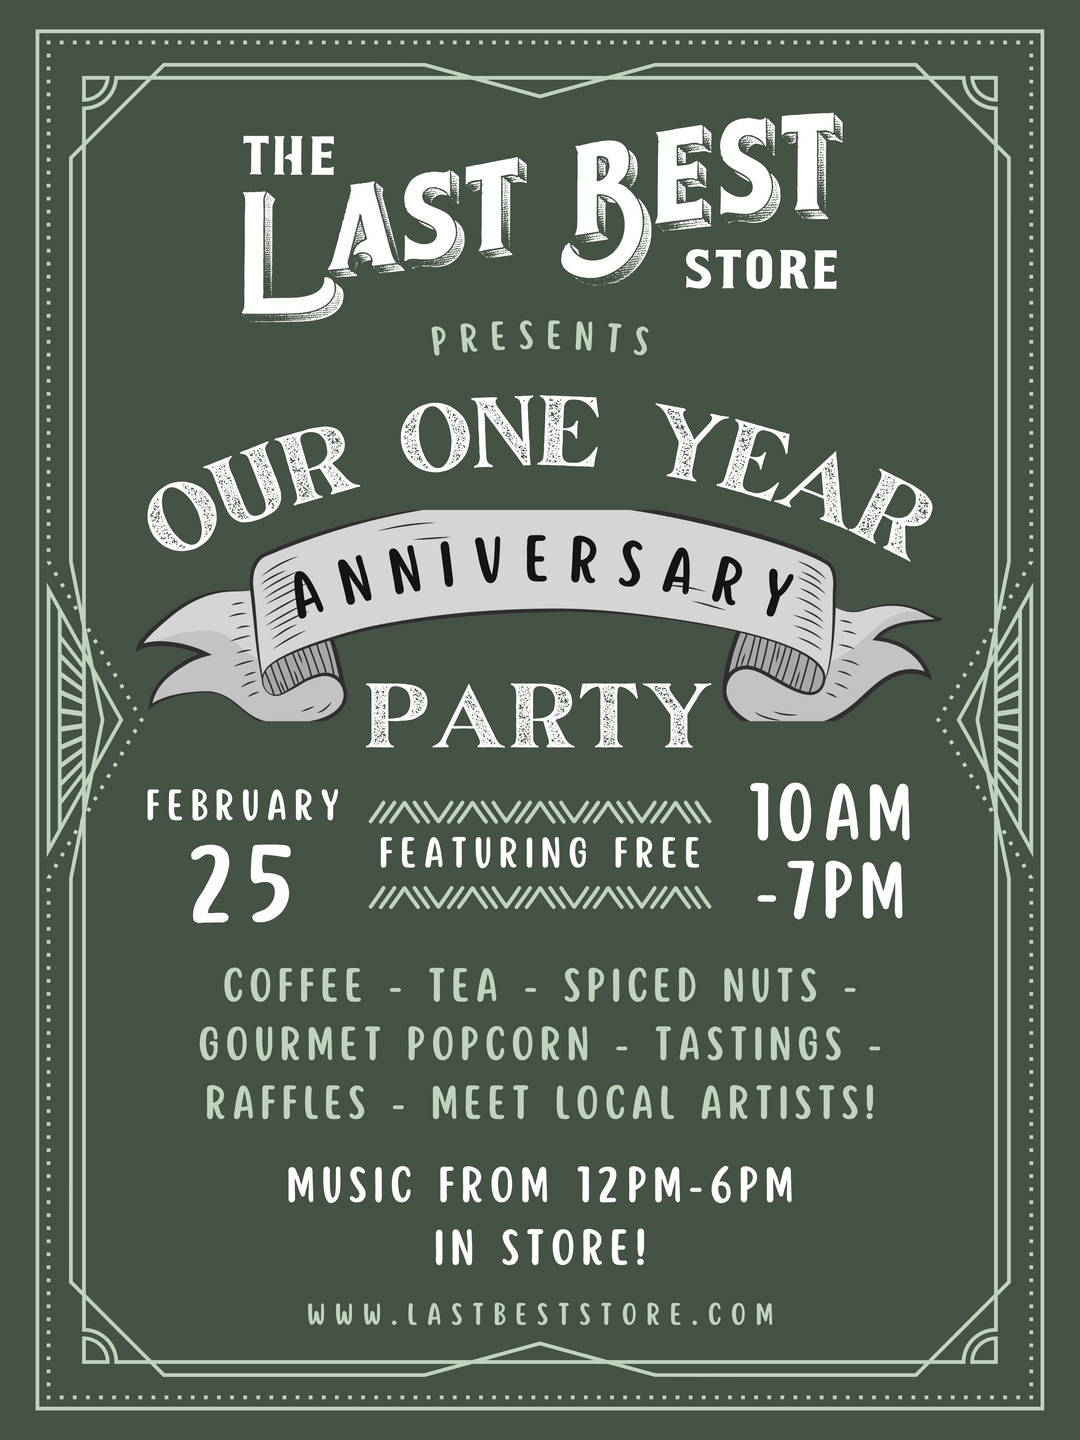 The Last Best Store Celebrates One Year in Business with a Big Bash!